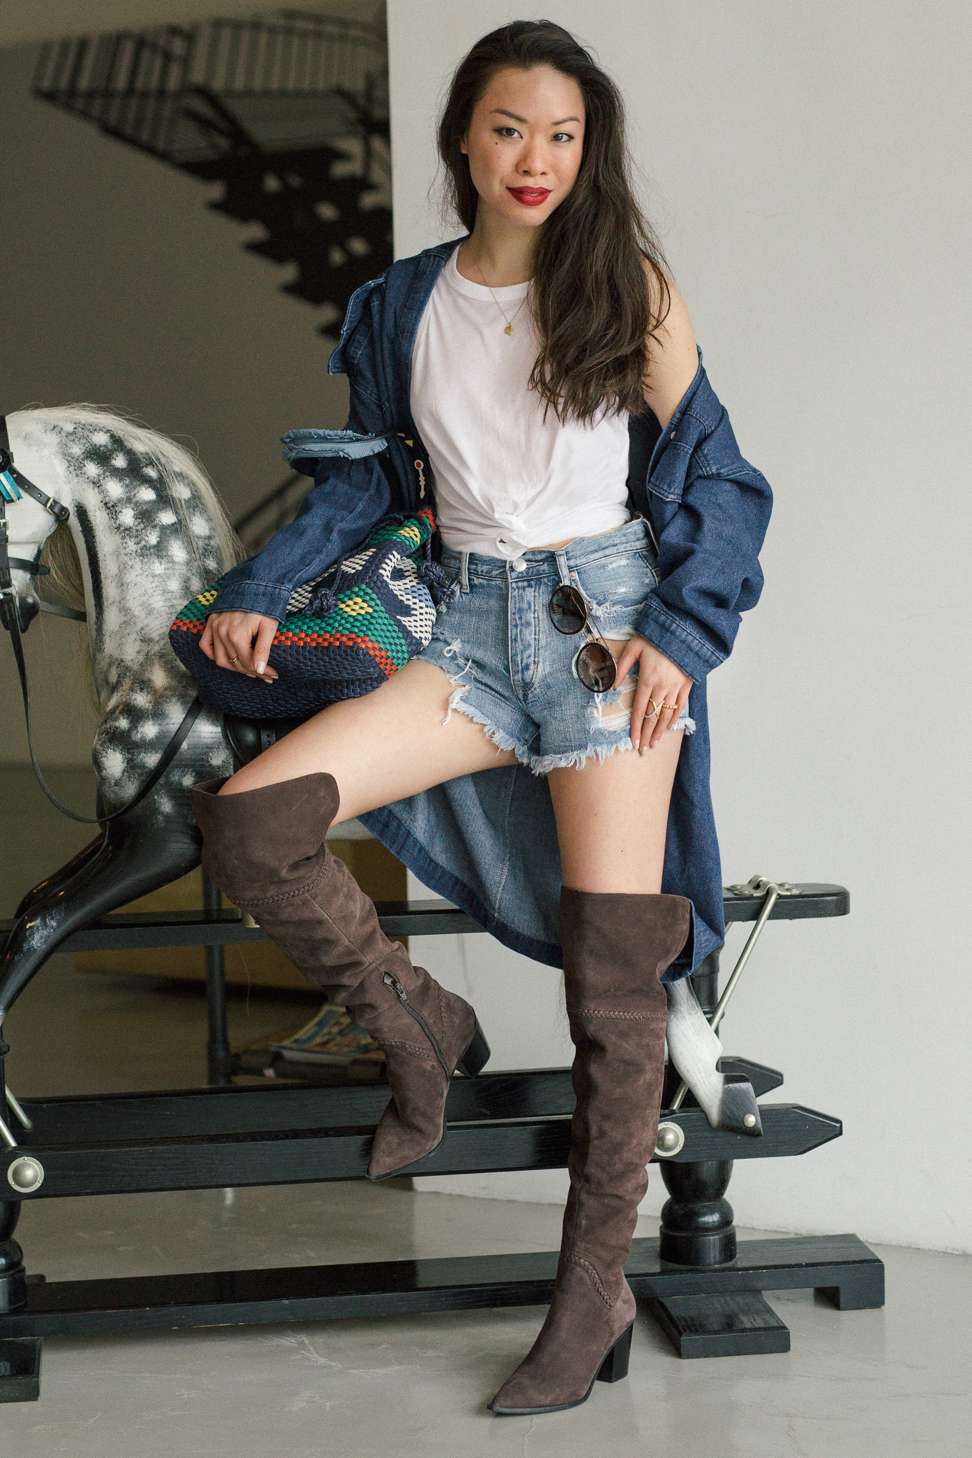 At work, Ling wears a denim shirt from ST Studio, white top from Club Monaco, shorts from American Eagle Outfitters, cowboy thigh-high boots from Aldo, sunglasses by Gucci, and necklace from David Yurman. Photo shot at The Piers Studios. Photo: Fan Wu